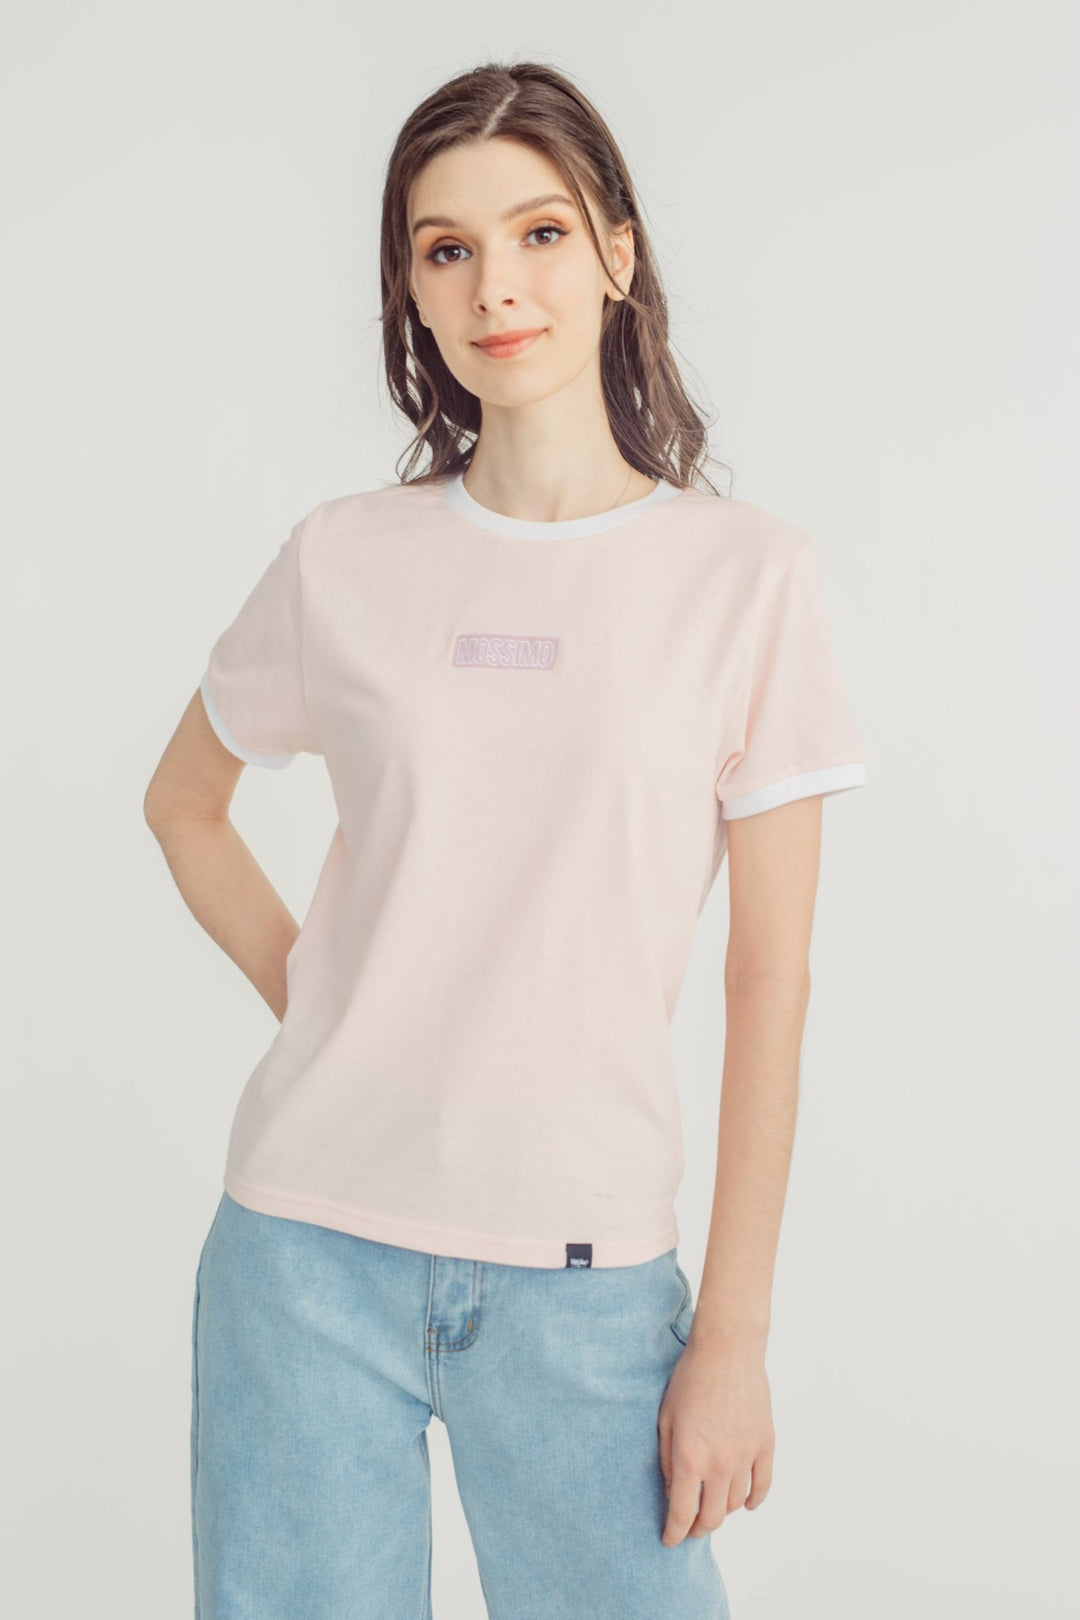 Small Branding on Ringer Classic Fit Tee - Mossimo PH